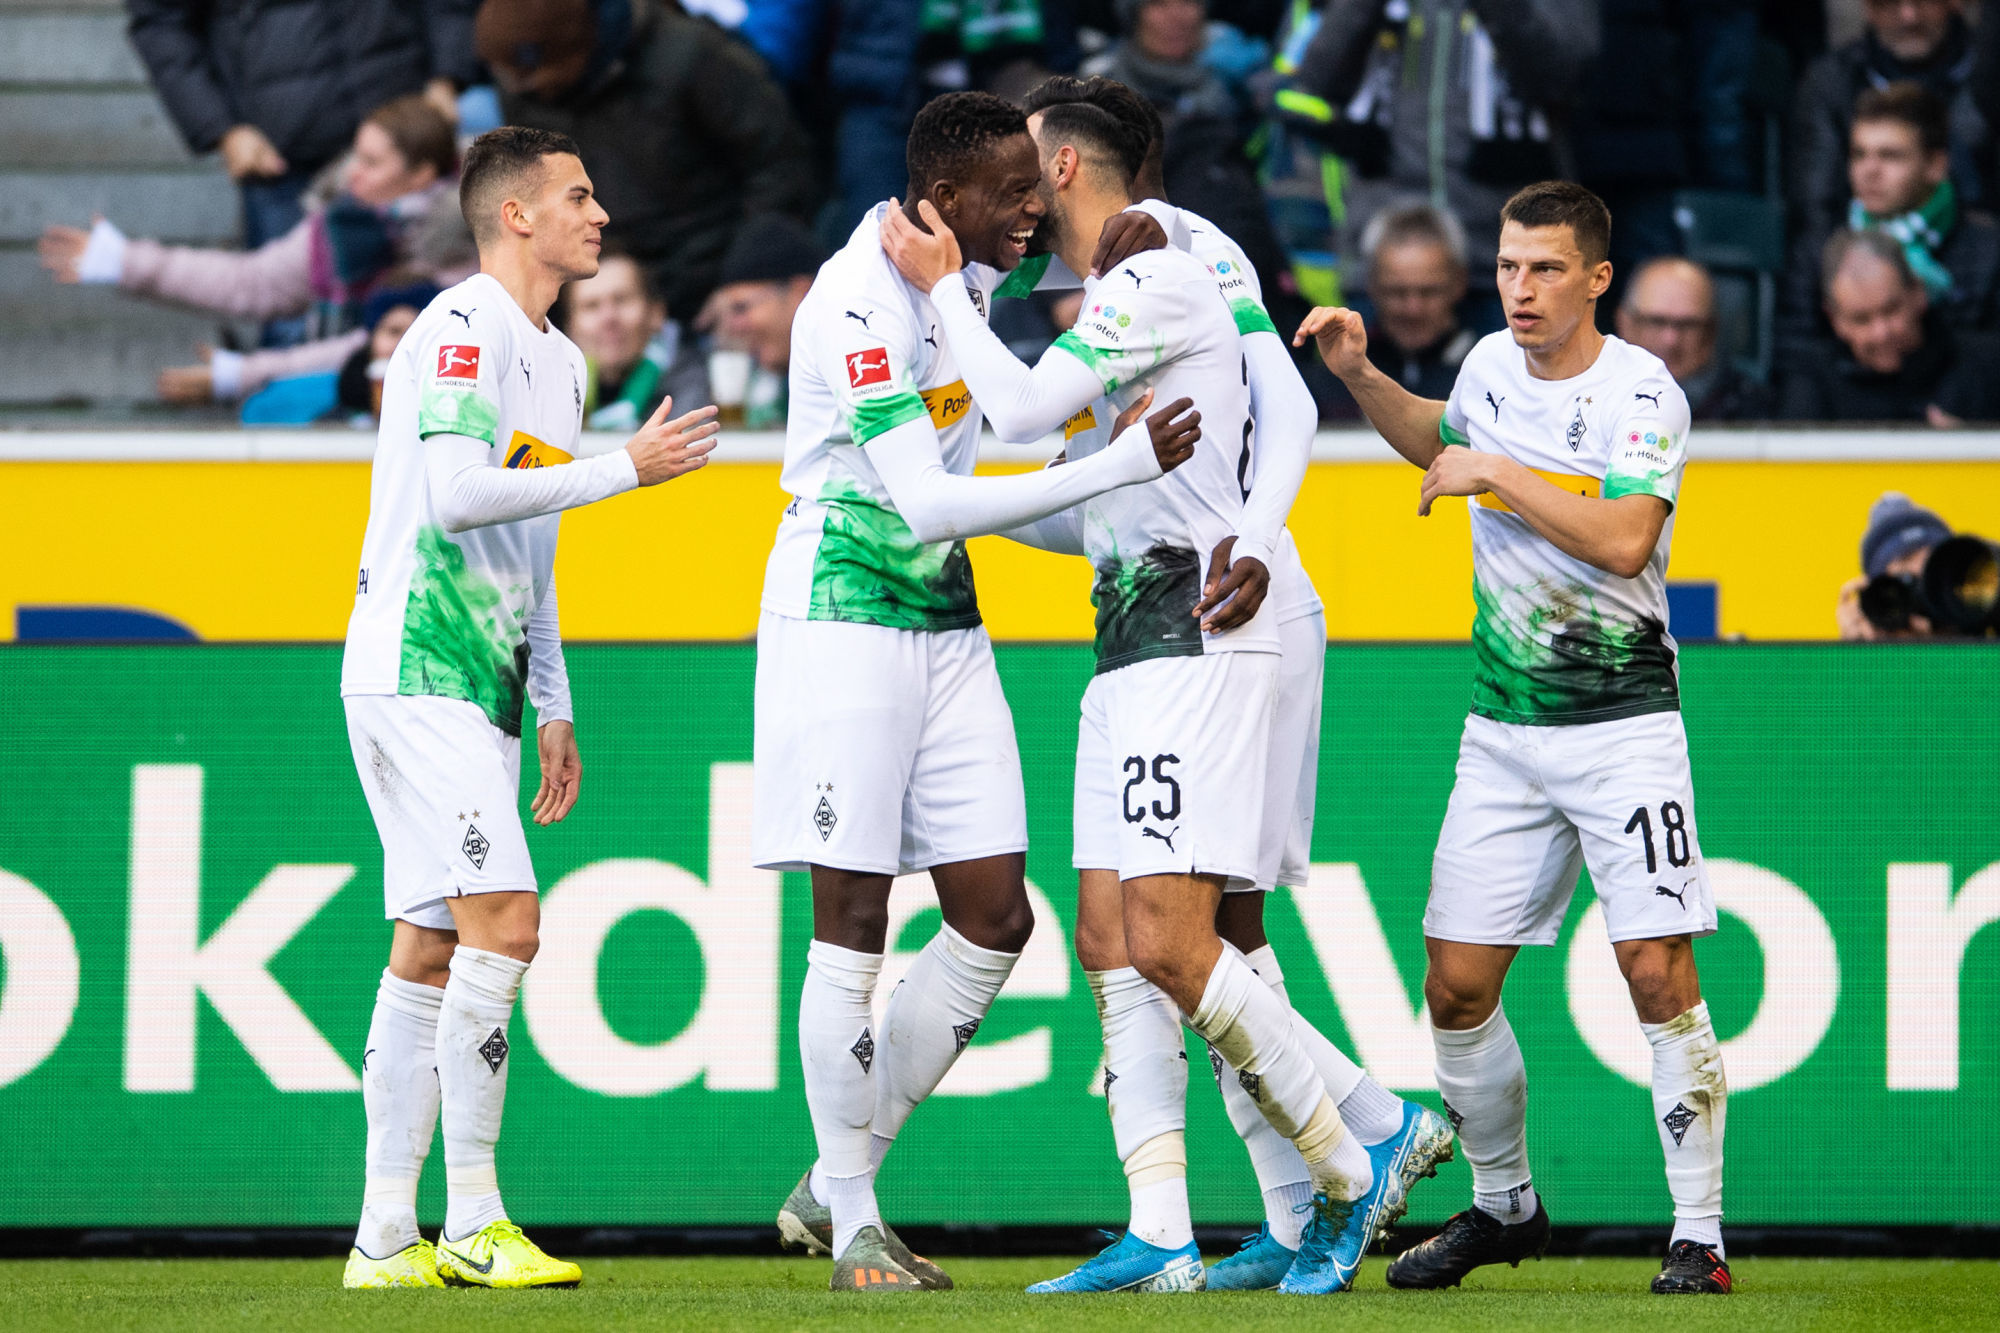 10 November 2019, North Rhine-Westphalia, Mˆnchengladbach: Soccer: Bundesliga, Borussia Mˆnchengladbach - Werder Bremen, 11th matchday in Borussia-Park. Gladbach's Alassane Plea (l-r), Stefan Lainer, Laszlo Benes and goal scorer Ramy Bensebaini cheer for a 1-0 lead after the goal. Photo: Marius Becker/dpa - IMPORTANT NOTE: In accordance with the requirements of the DFL Deutsche Fu?ball Liga or the DFB Deutscher Fu?ball-Bund, it is prohibited to use or have used photographs taken in the stadium and/or the match in the form of sequence images and/or video-like photo sequences. 

Photo by Icon Sport - Borussia-Park - Monchengladbach (Allemagne)